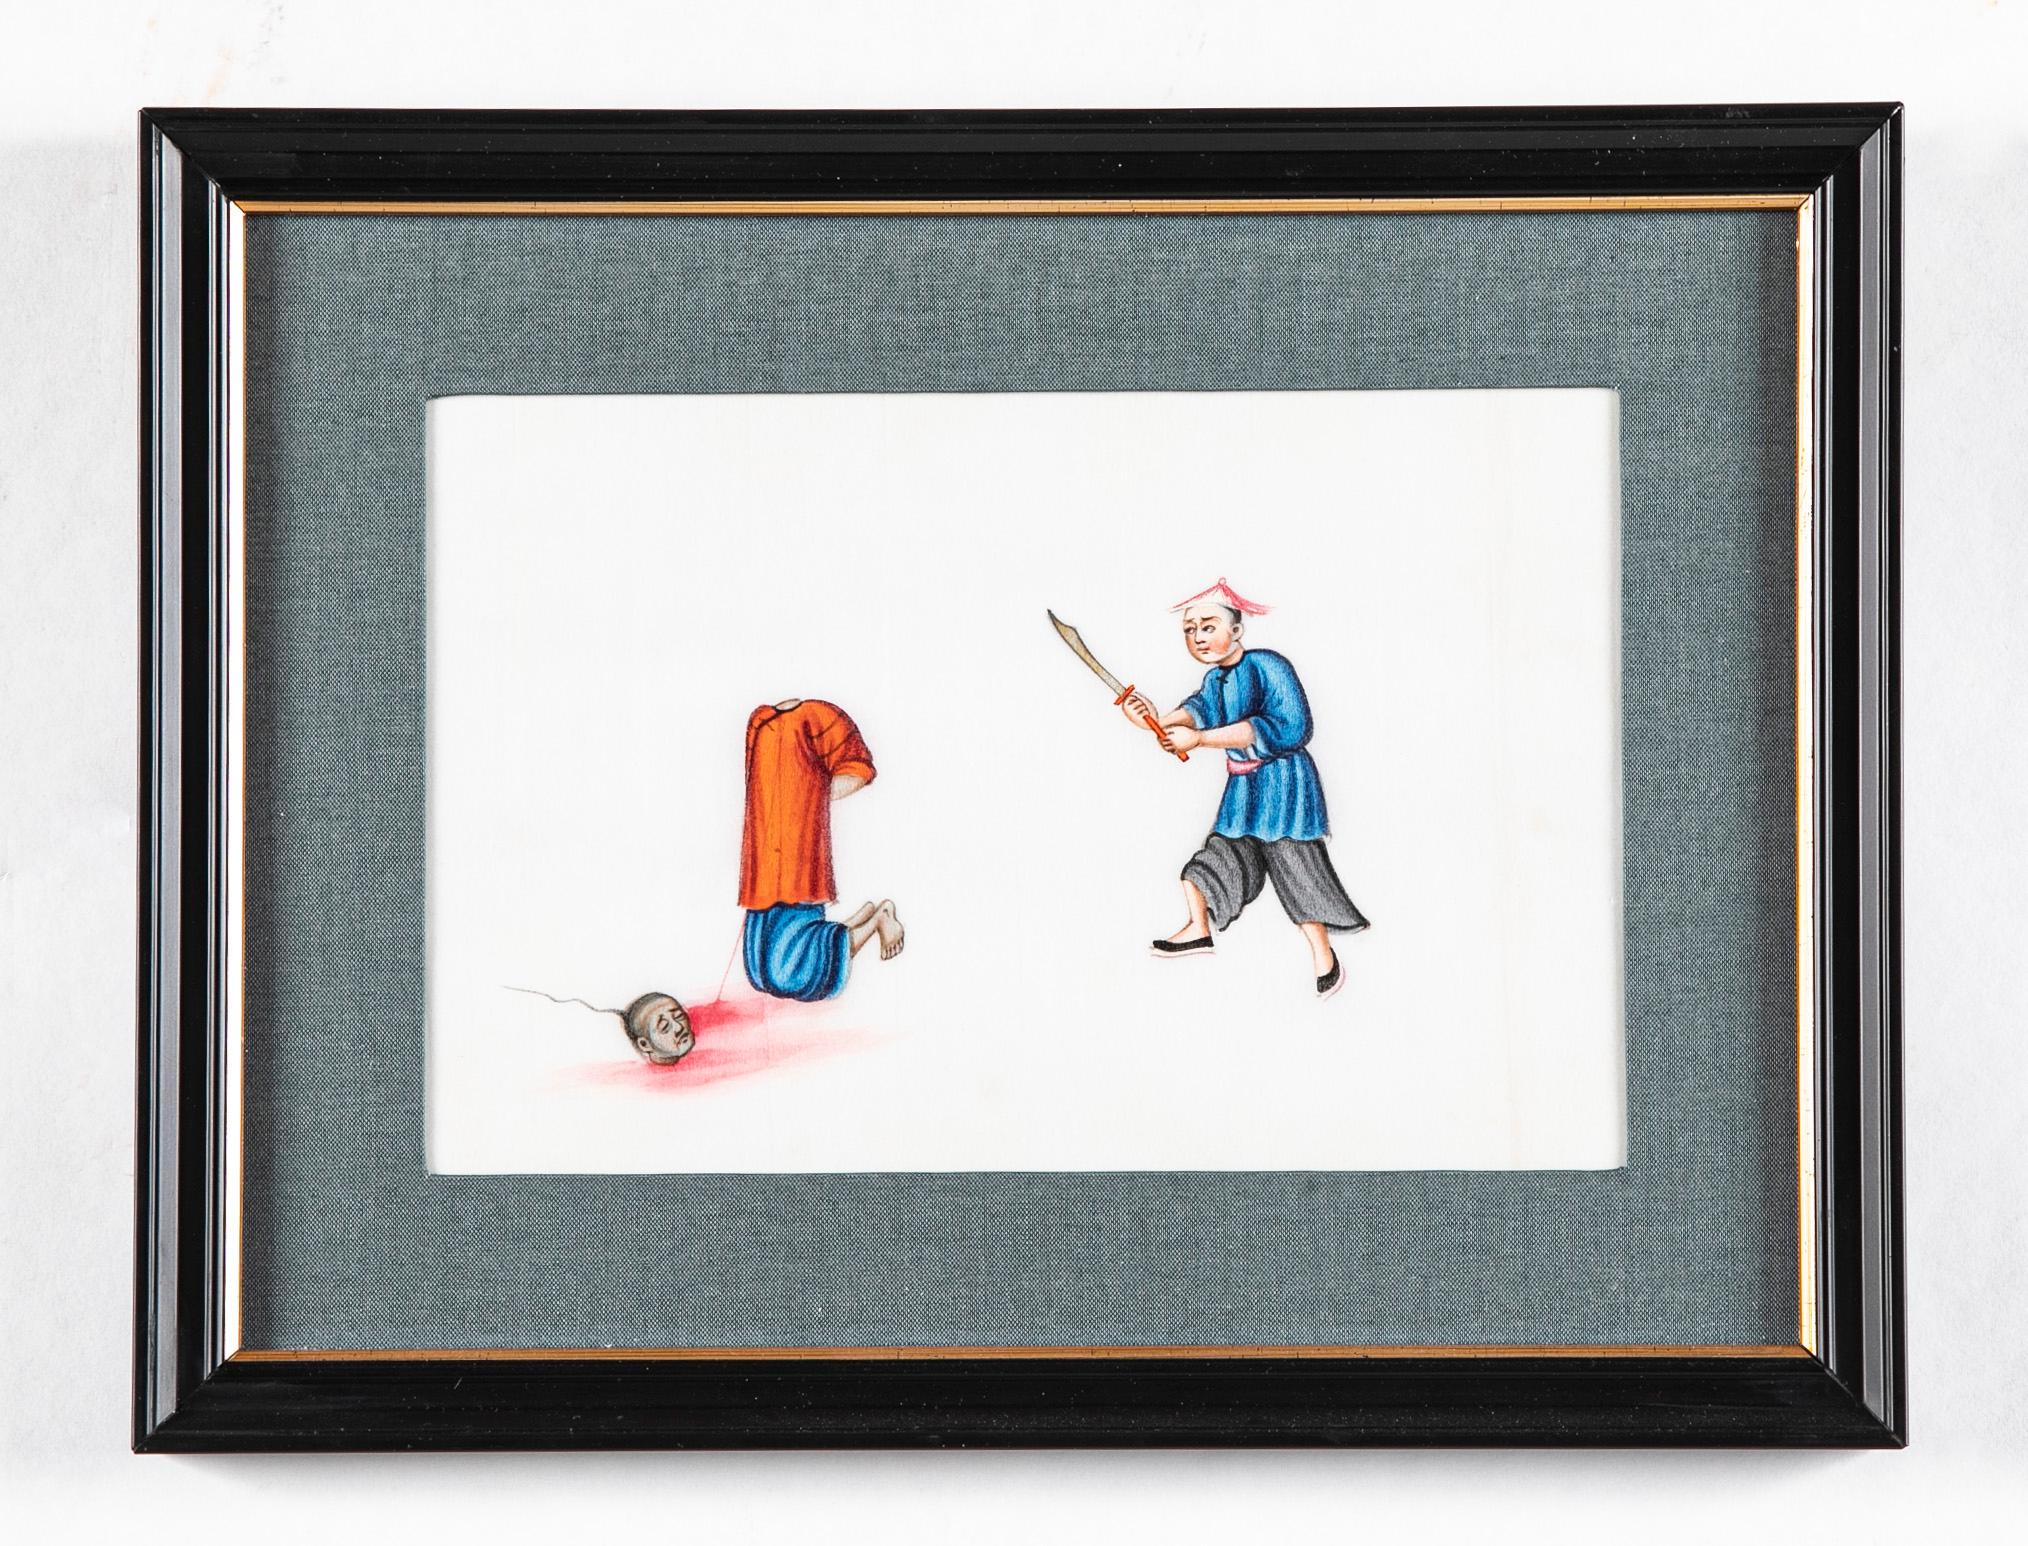 A very unusual and intriguing rare set of six 19th century Chinese gouaches depicting scenes of corporal punishment, and in one, execution. Painted on pith paper in vibrant colors, the images are disturbing yet have historical value. One shows a